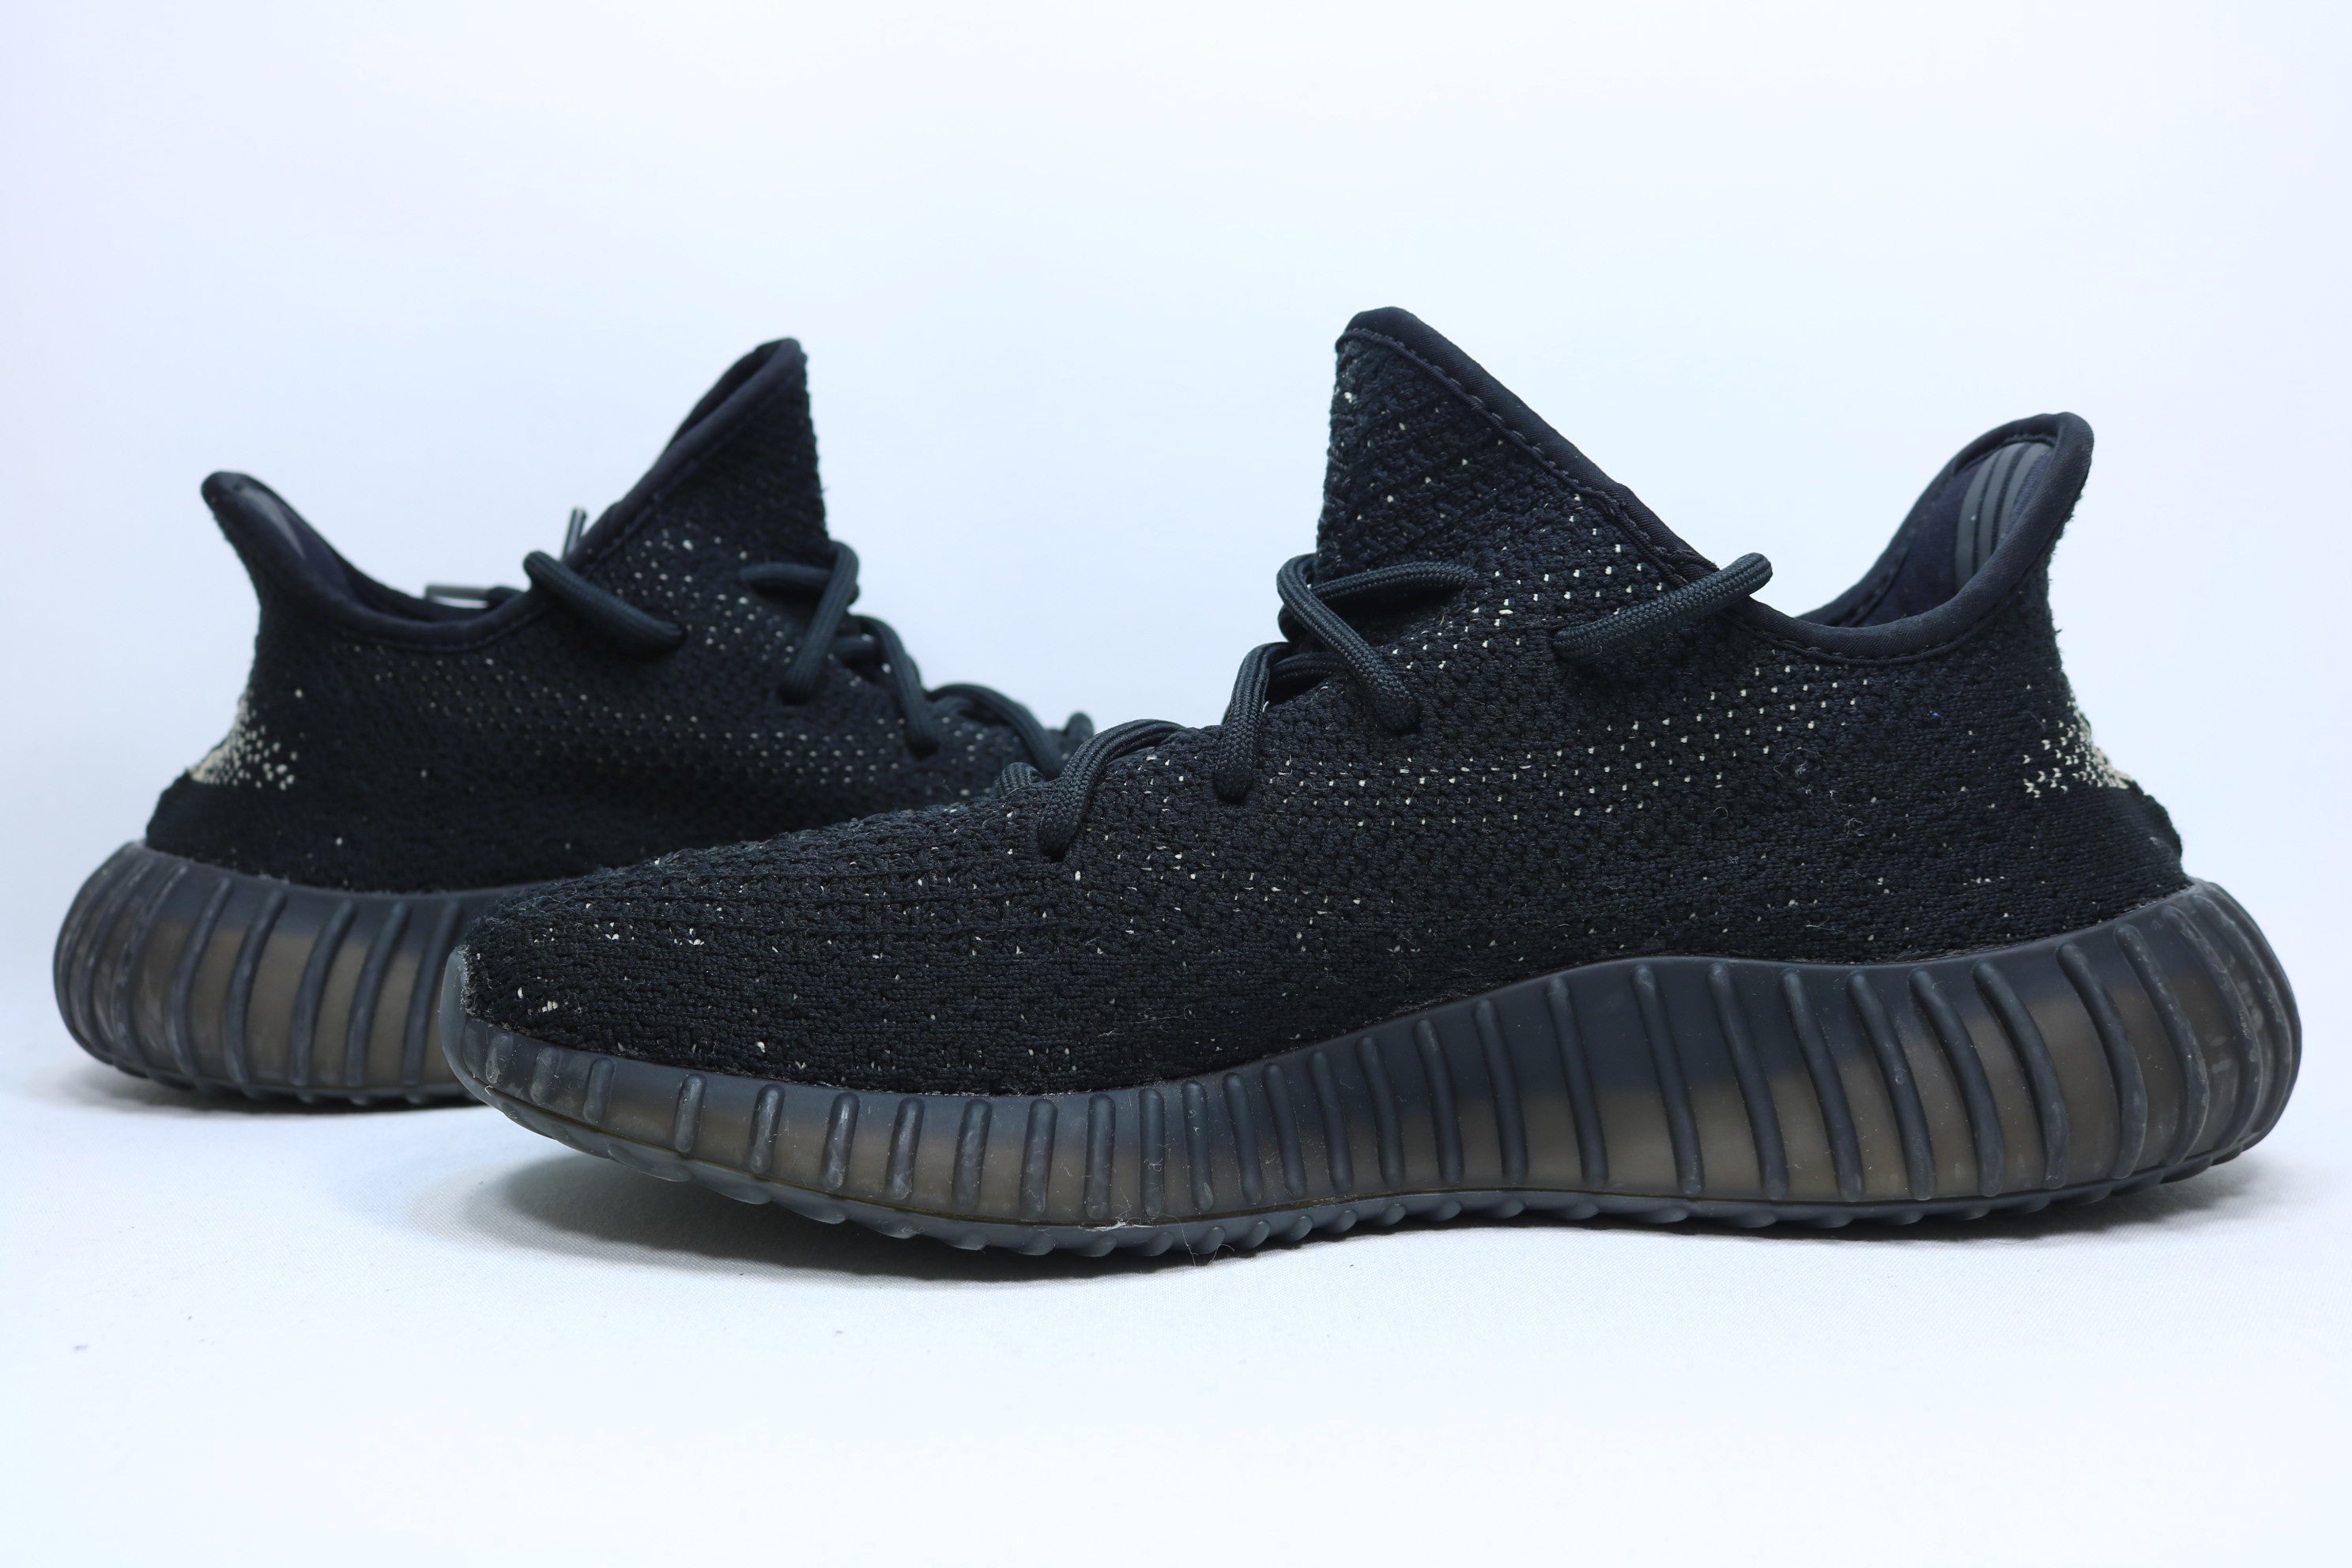 Adidas Yeezy Boost 350 V2 Oreo for Sale – The Sole Library